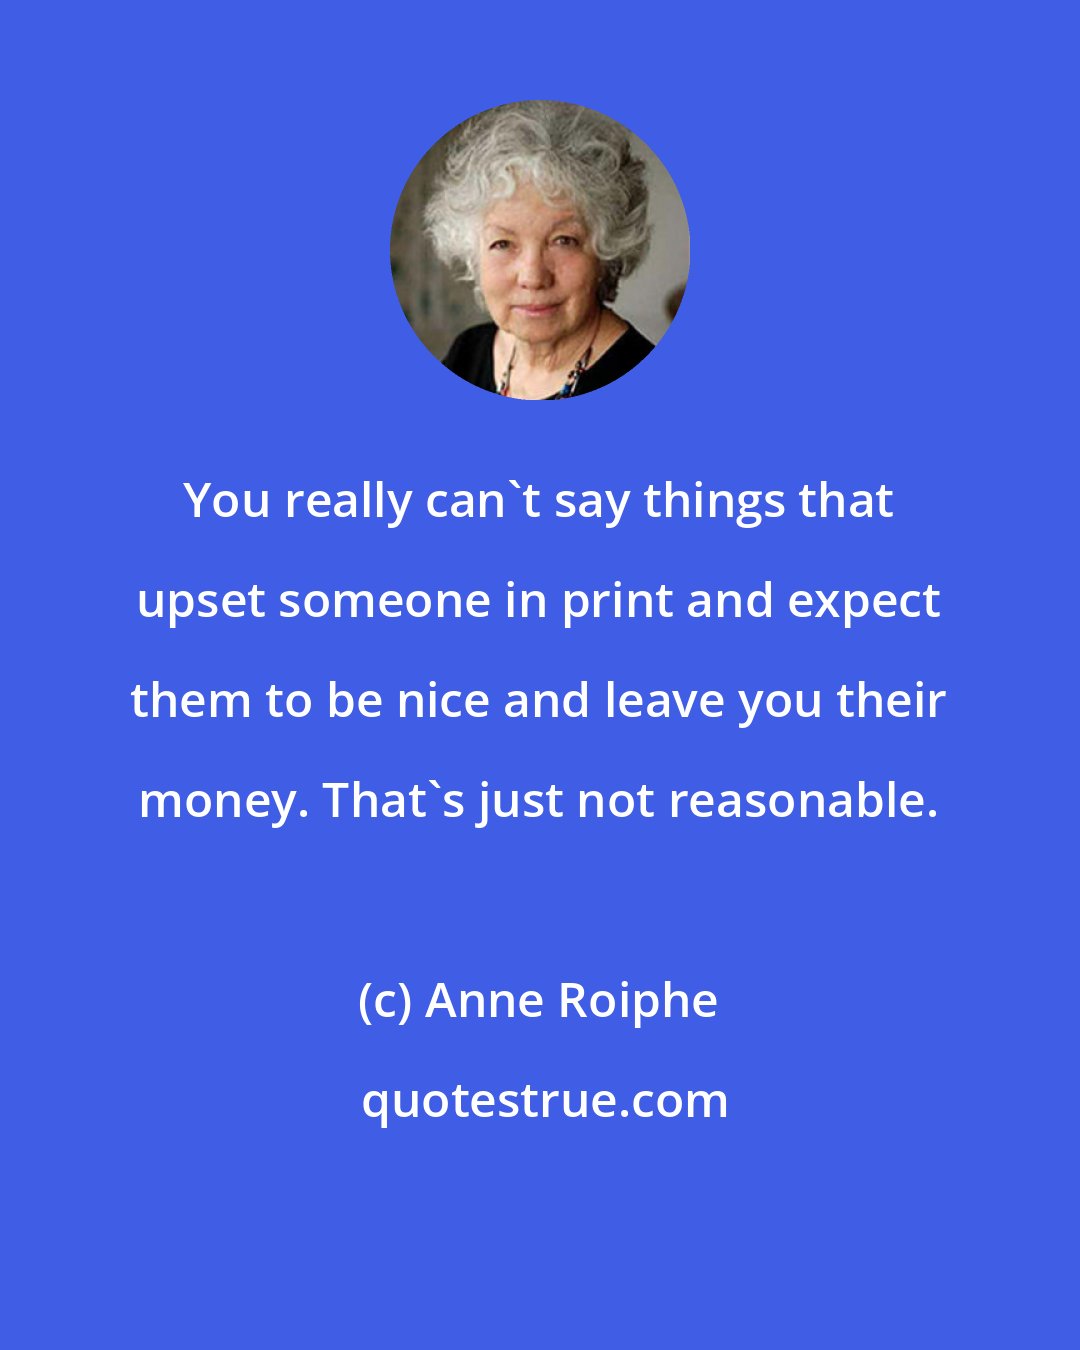 Anne Roiphe: You really can't say things that upset someone in print and expect them to be nice and leave you their money. That's just not reasonable.